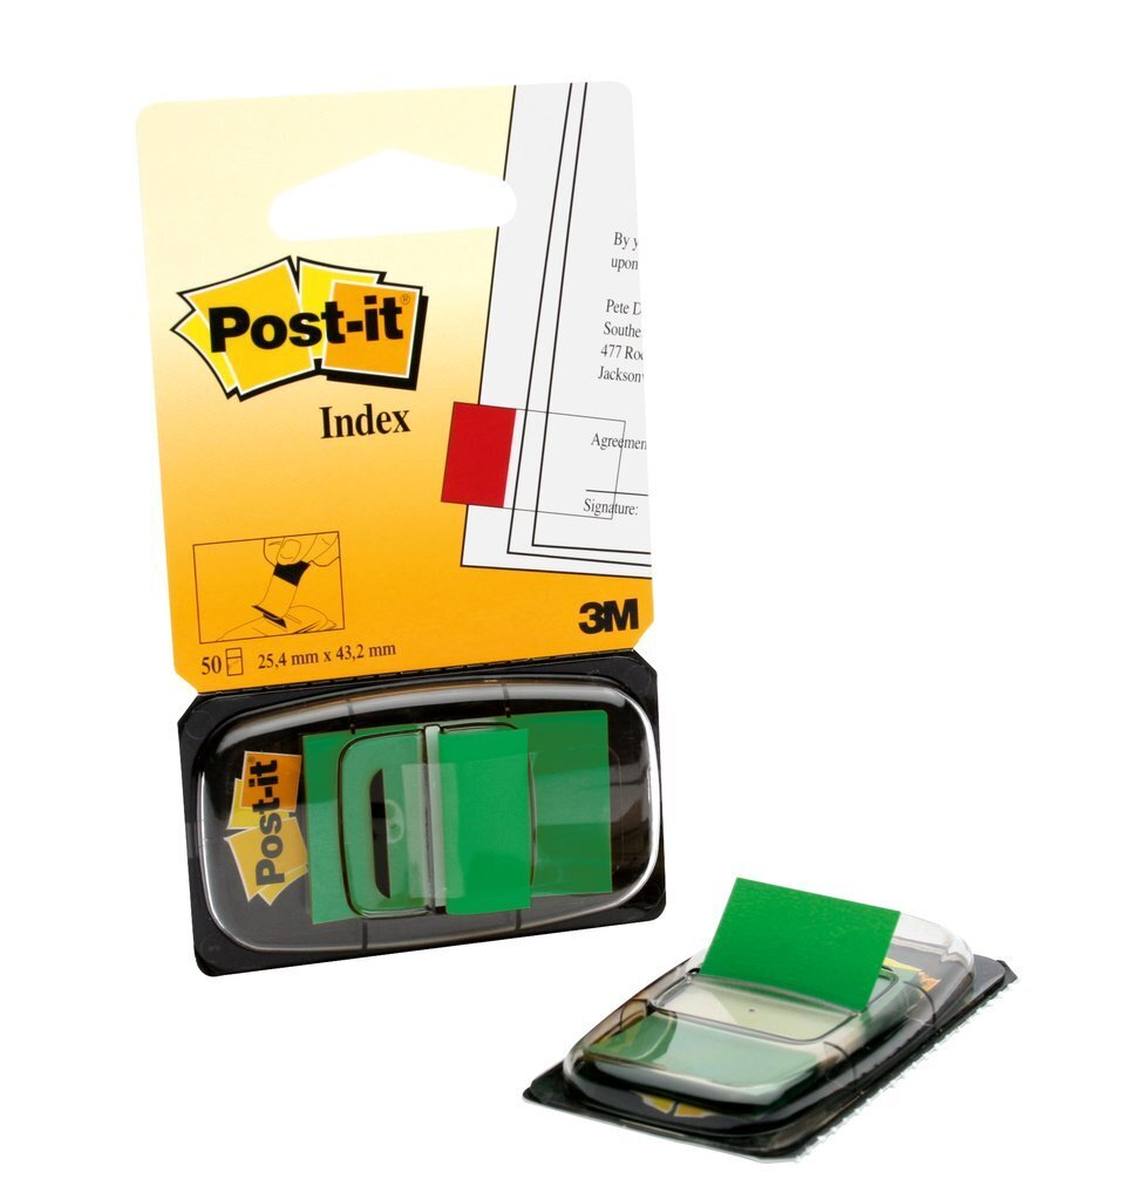 3M Post-it Index I680-3, 25.4 mm x 43.2 mm, green, 1 x 50 adhesive strips in dispenser